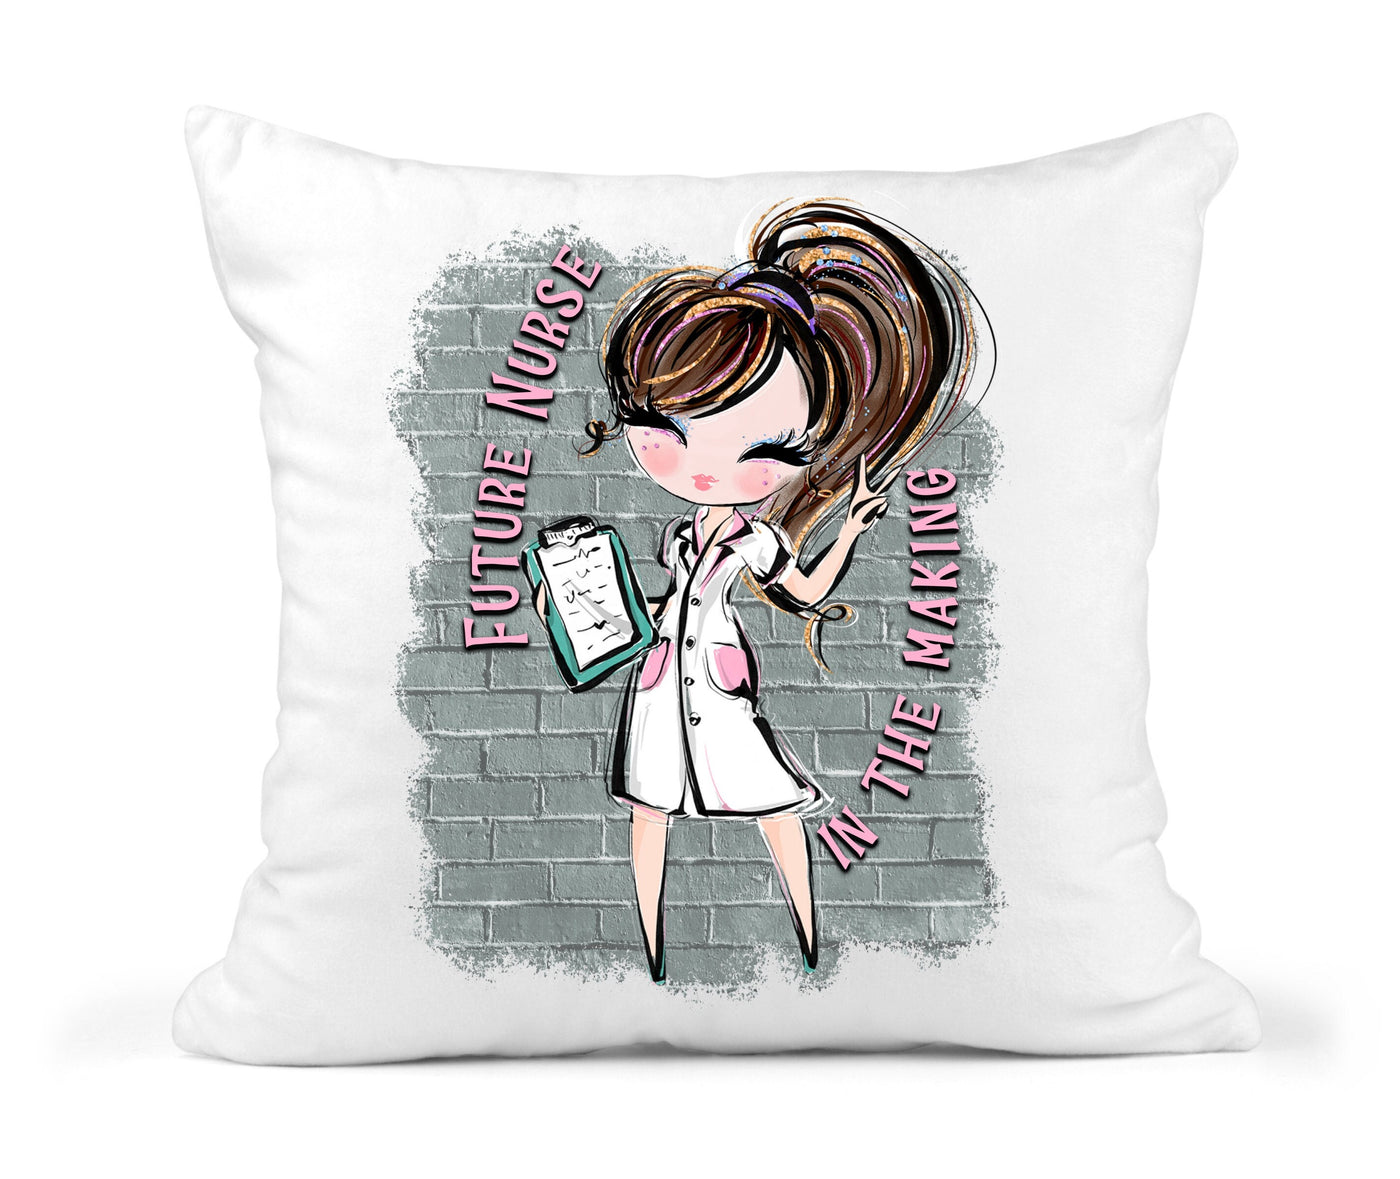 Personalized Student Nurse Throw Pillow Hand Drawn